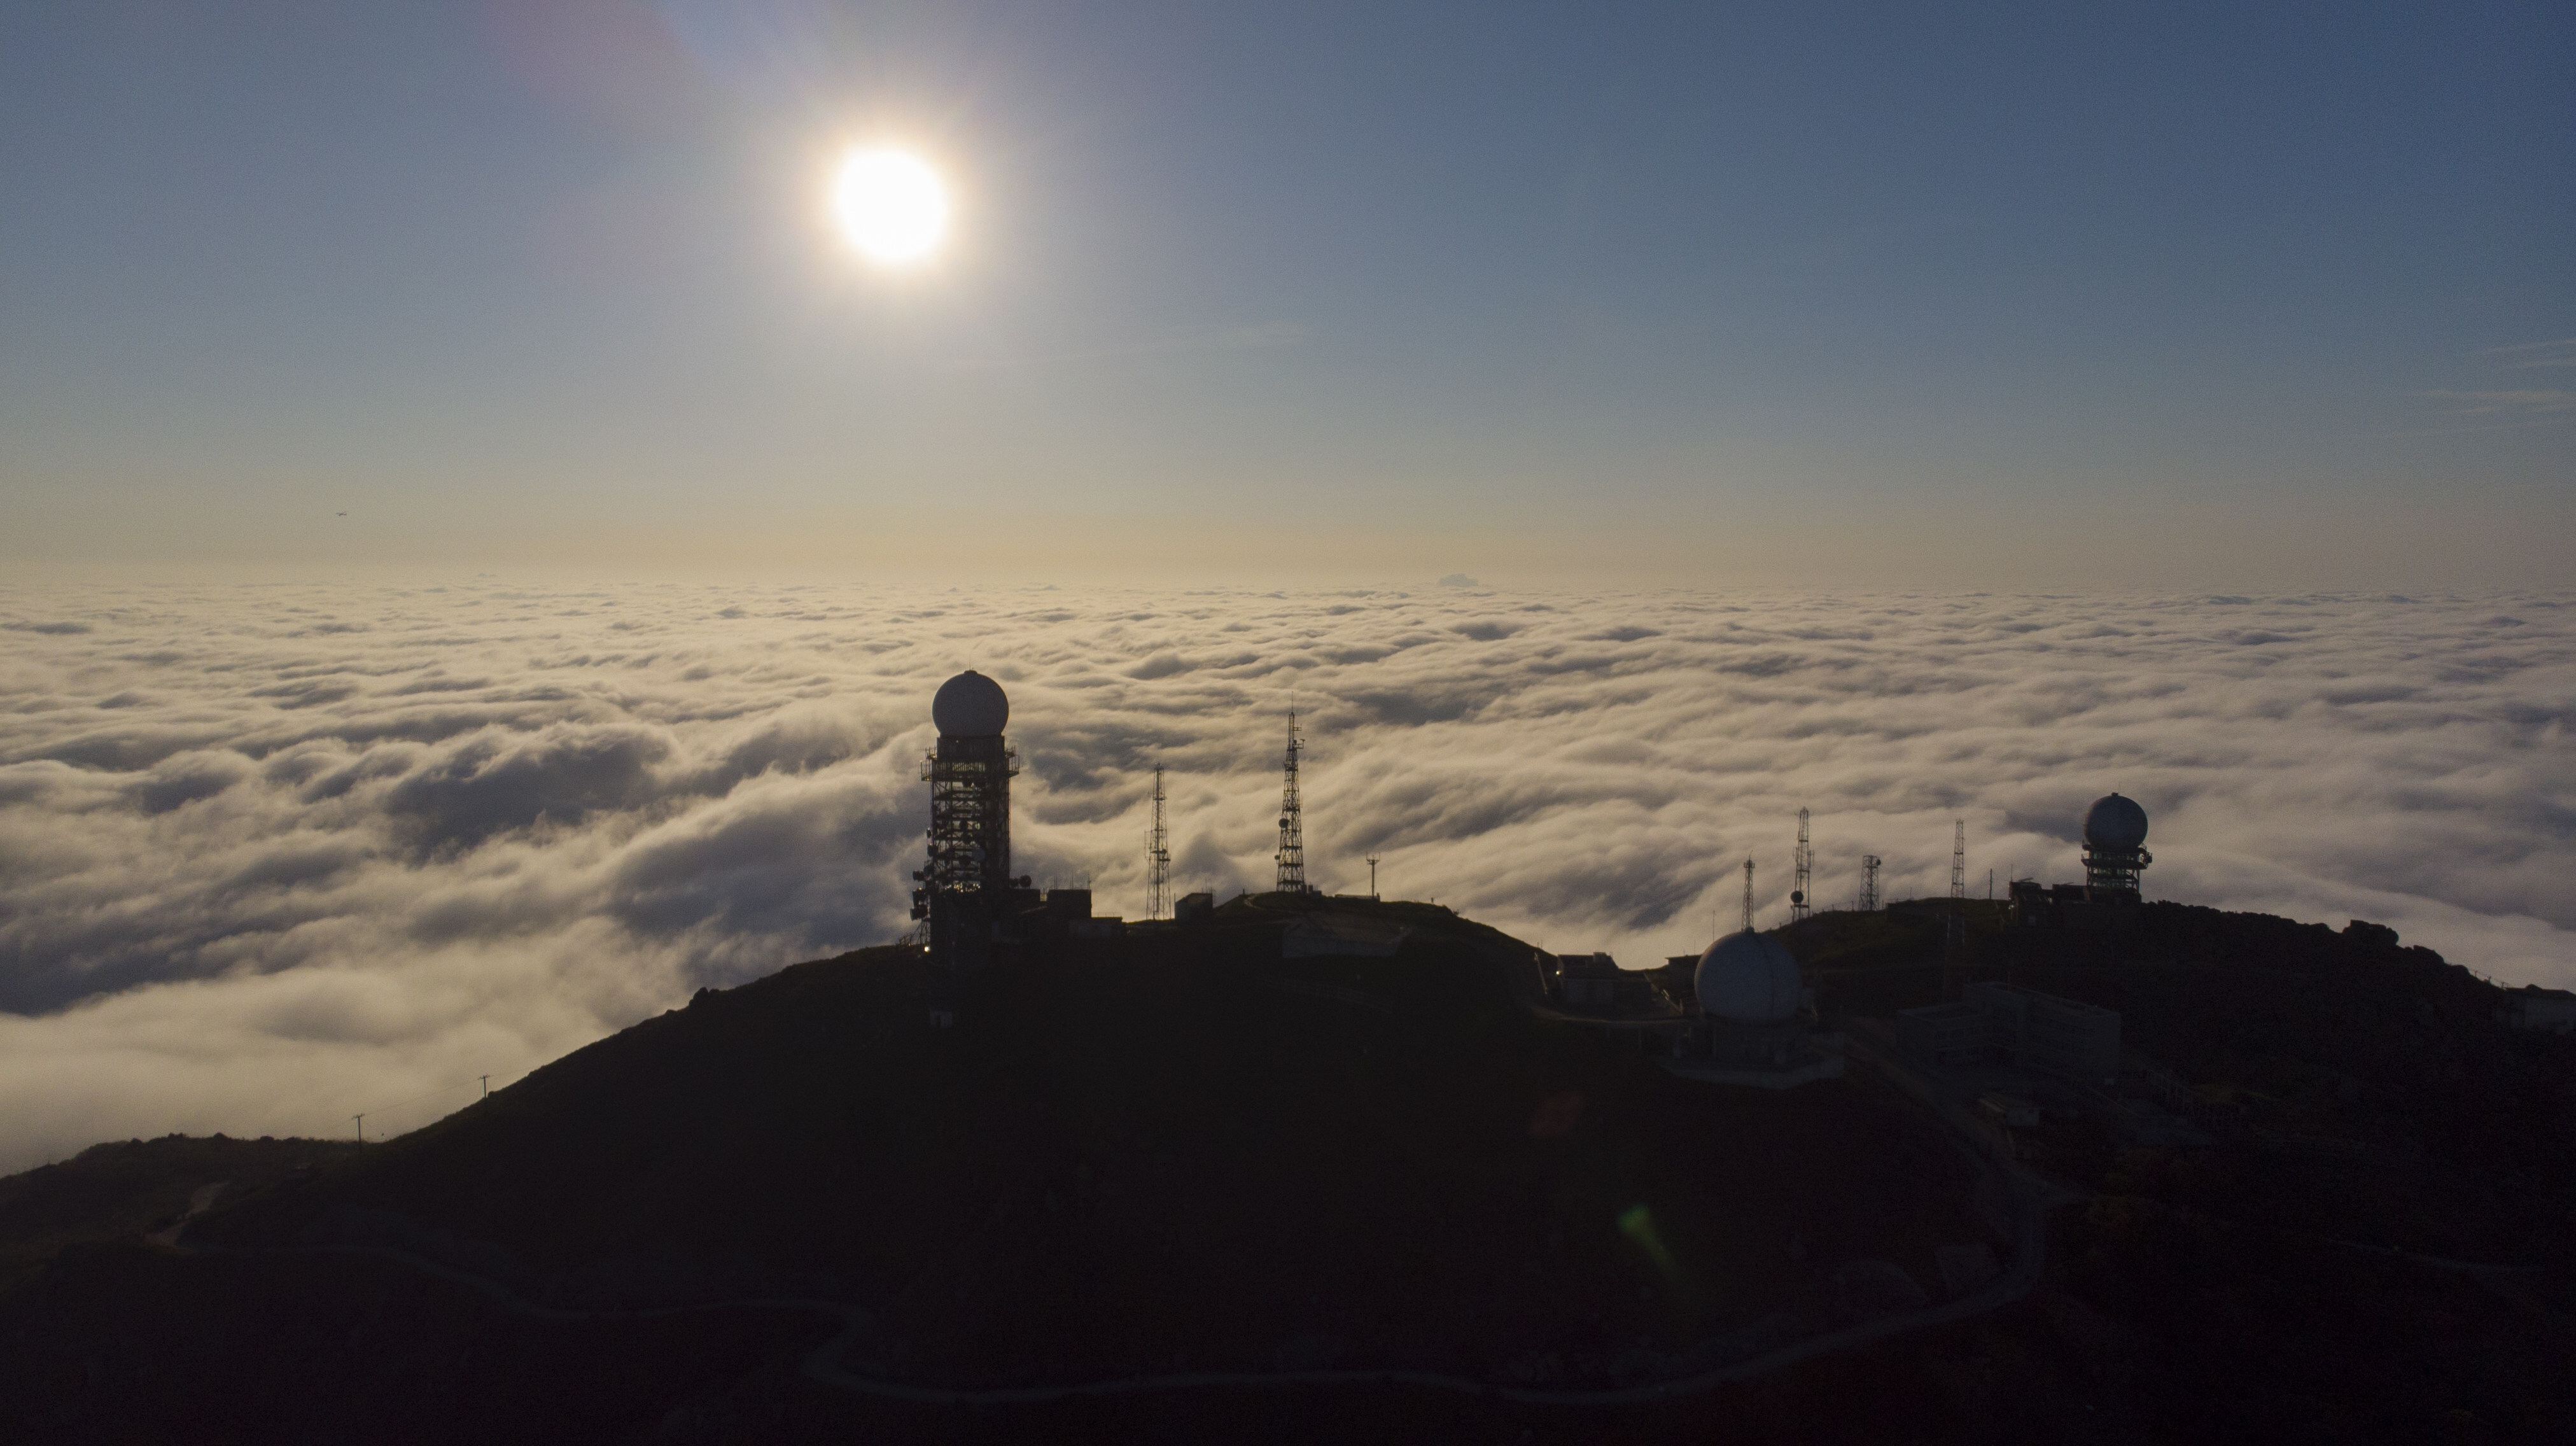 The weather radar facilities on Tai Mo Shan, Hong Kong, look out over a sea of clouds on January 13, 2019. Improving the quality of weather forecasts, early warning systems and climate information services across the globe is vital. Photo: Martin Chan